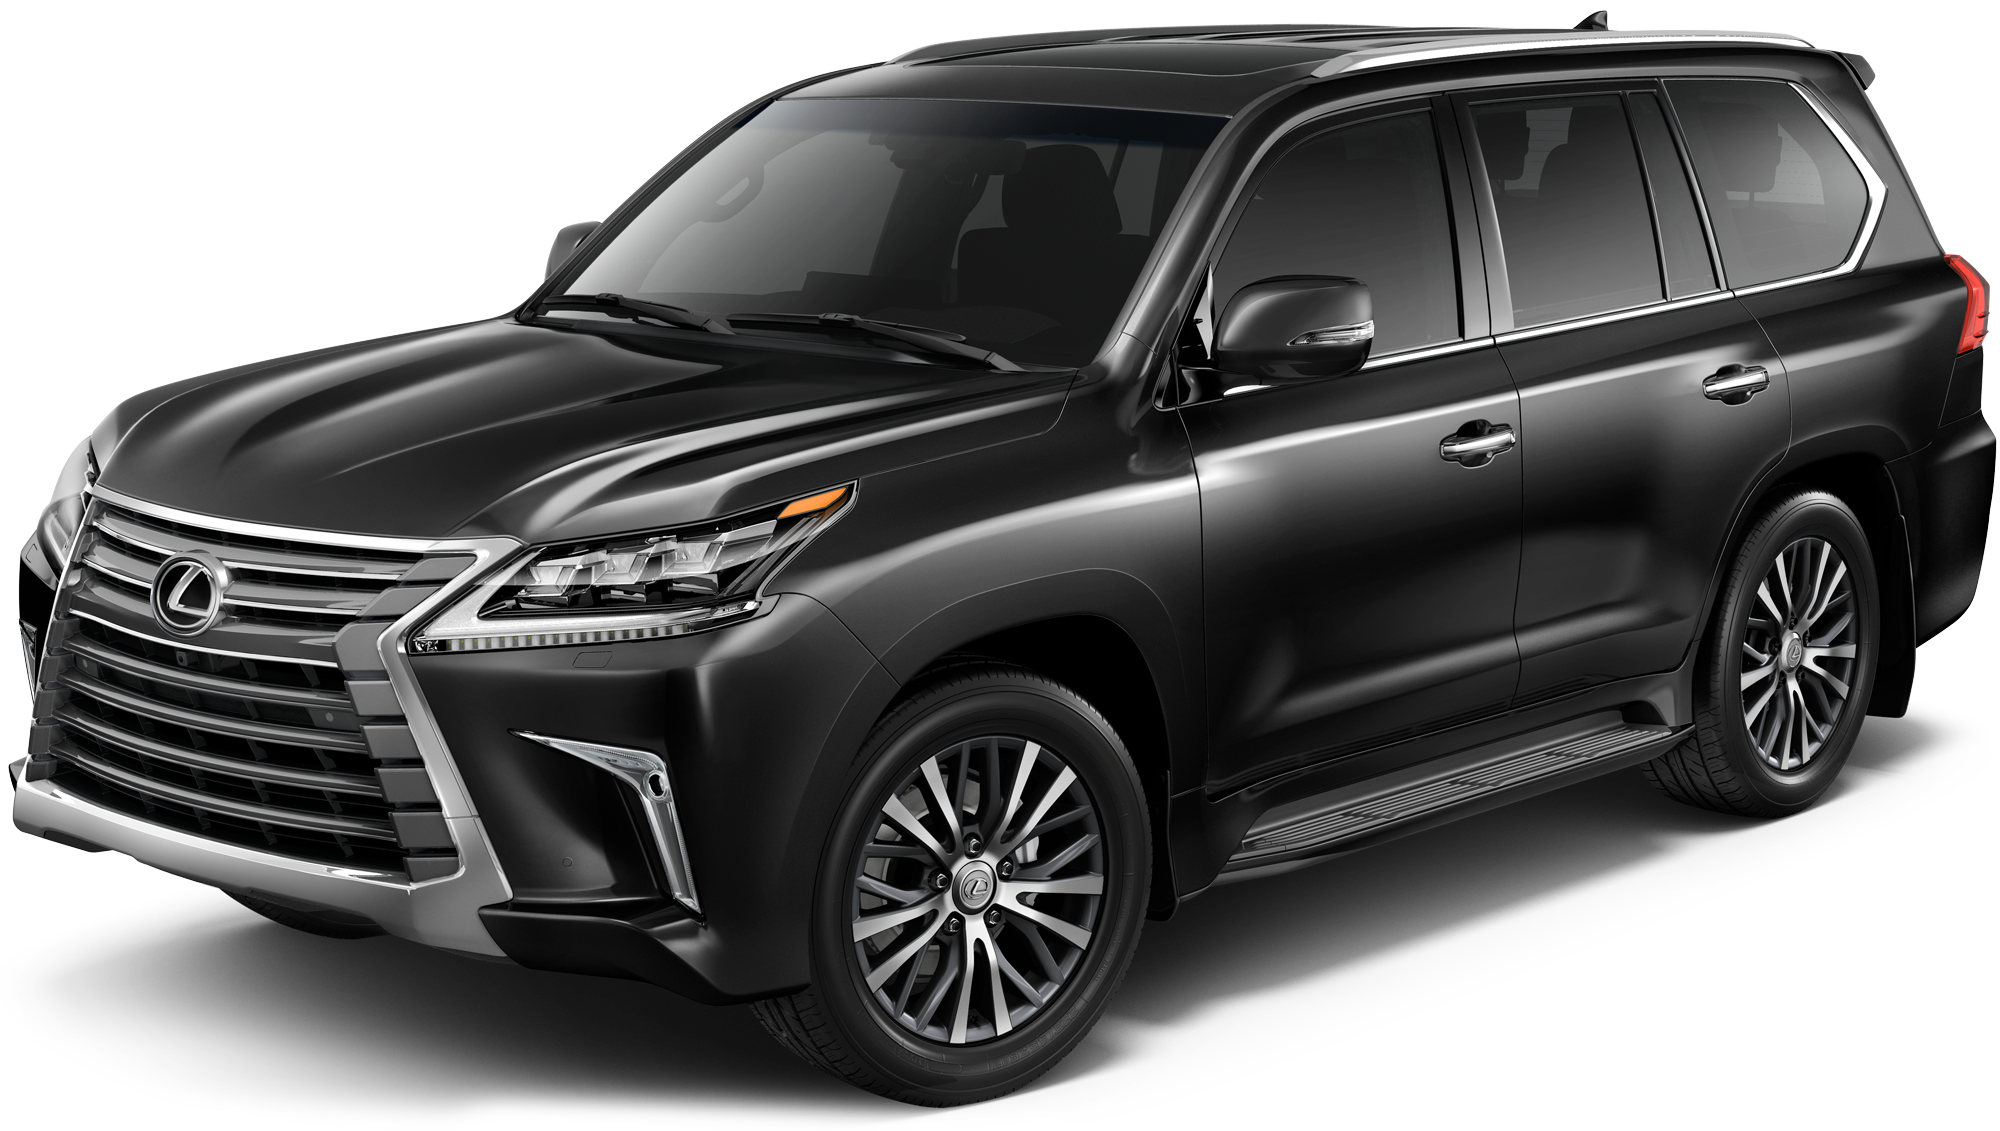 2019 Lexus LX 570 Incentives, Specials & Offers in